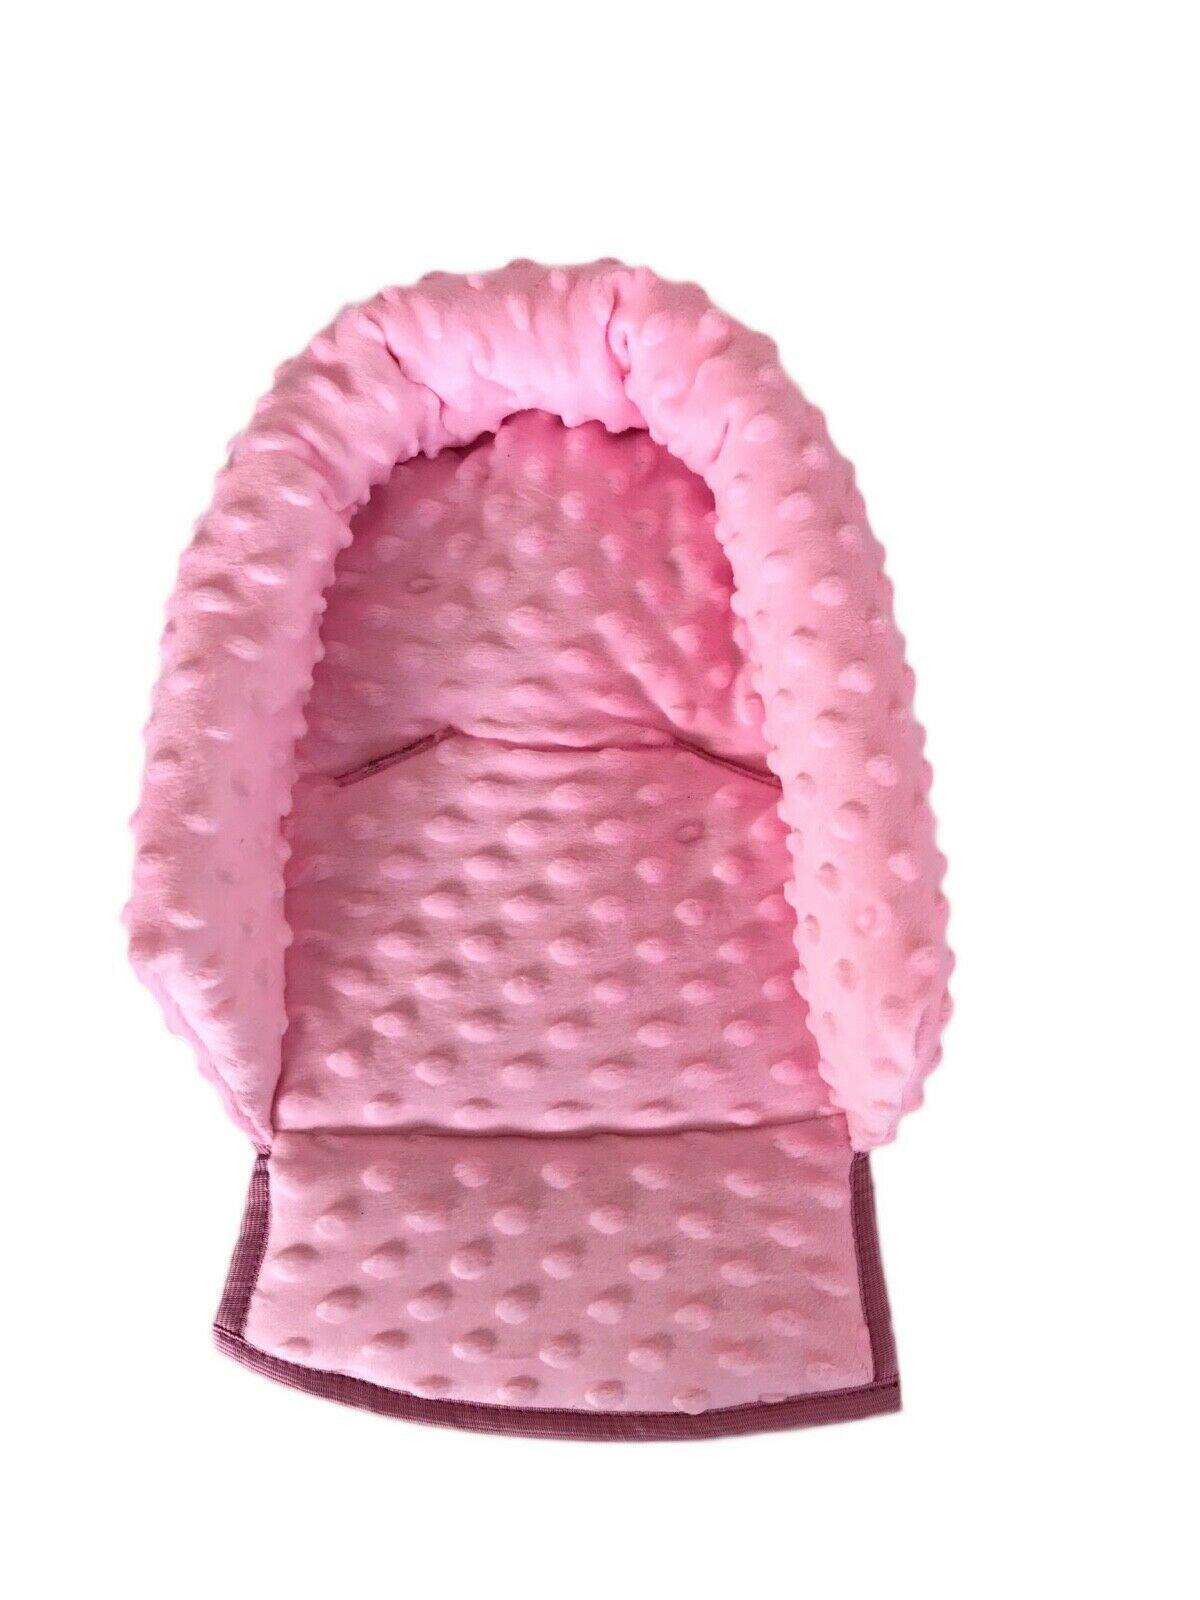 Baby Head Car Seat Rest Cushion Toddler Child Support Pillow Dimple Light Pink